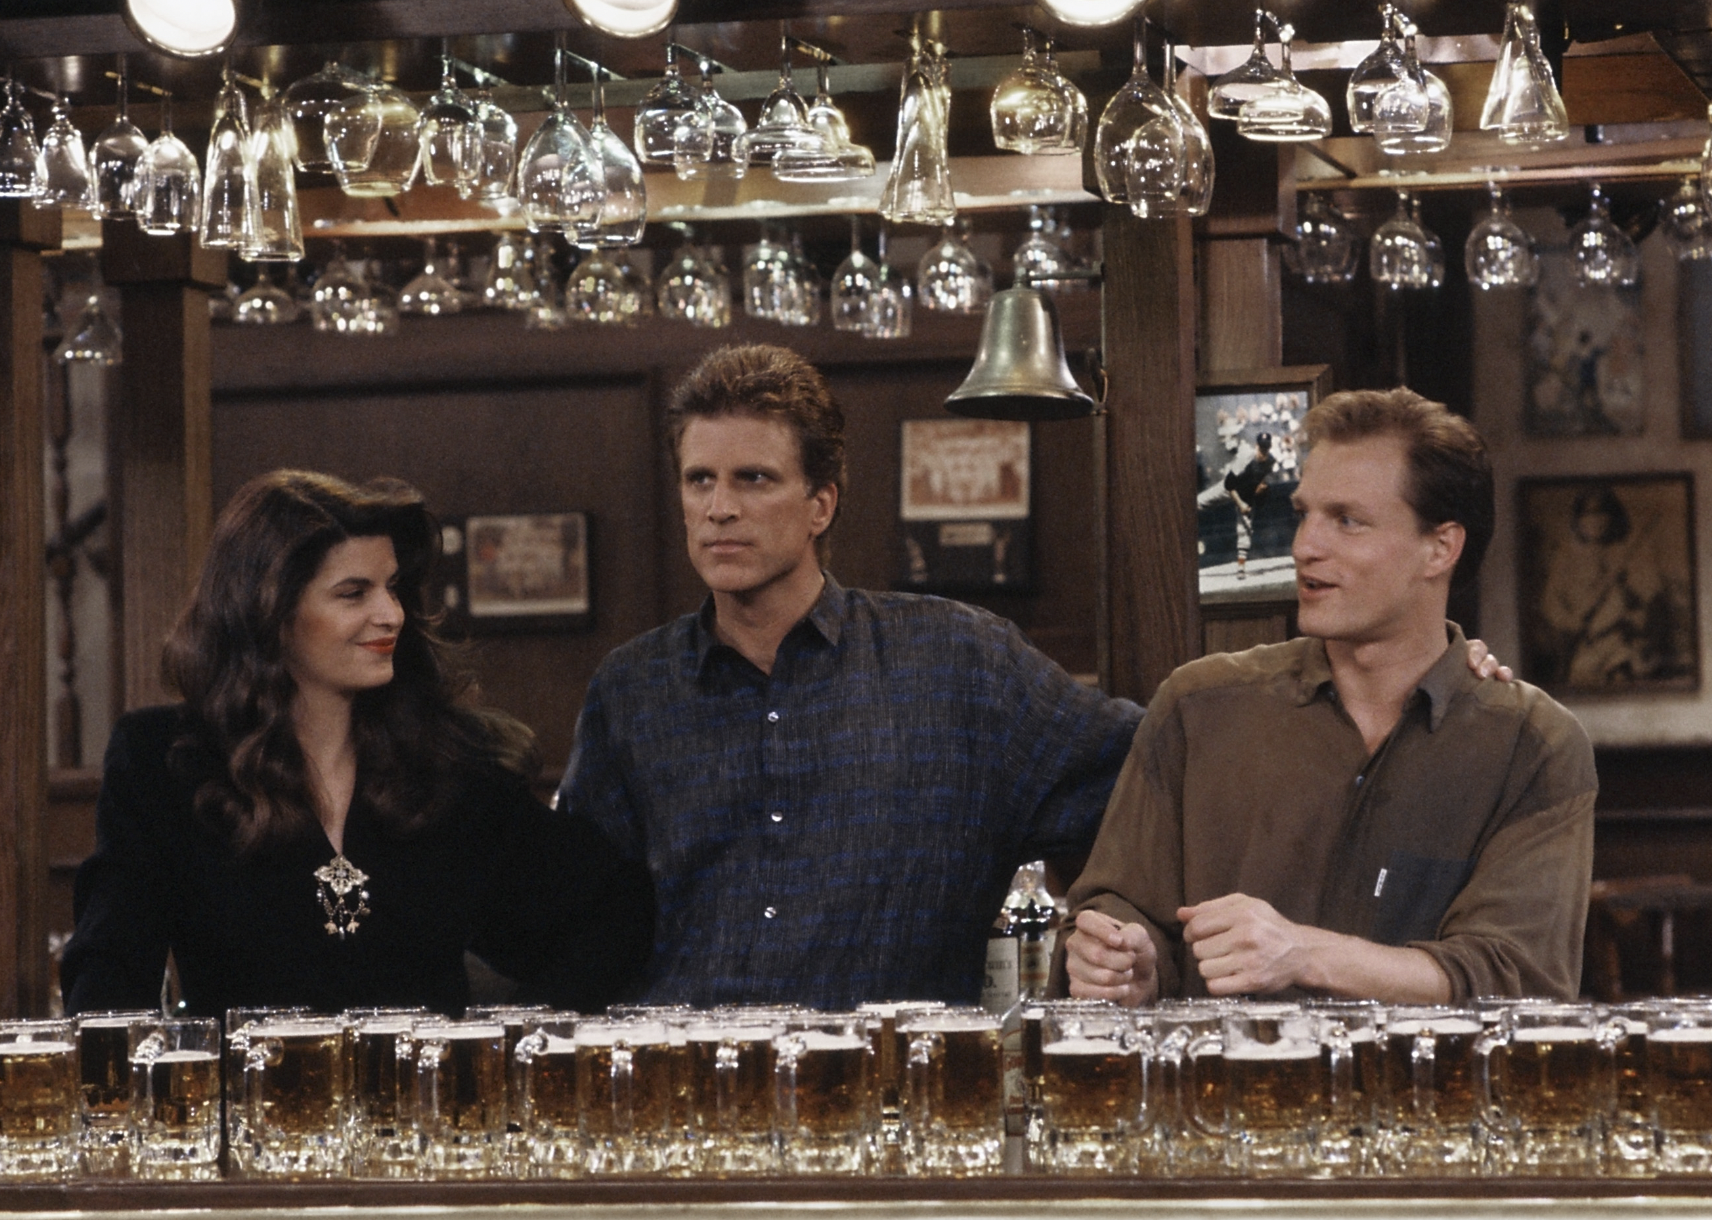 Kirstie Alley, Woody Harrelson, and Ted Danson in "Cheers"